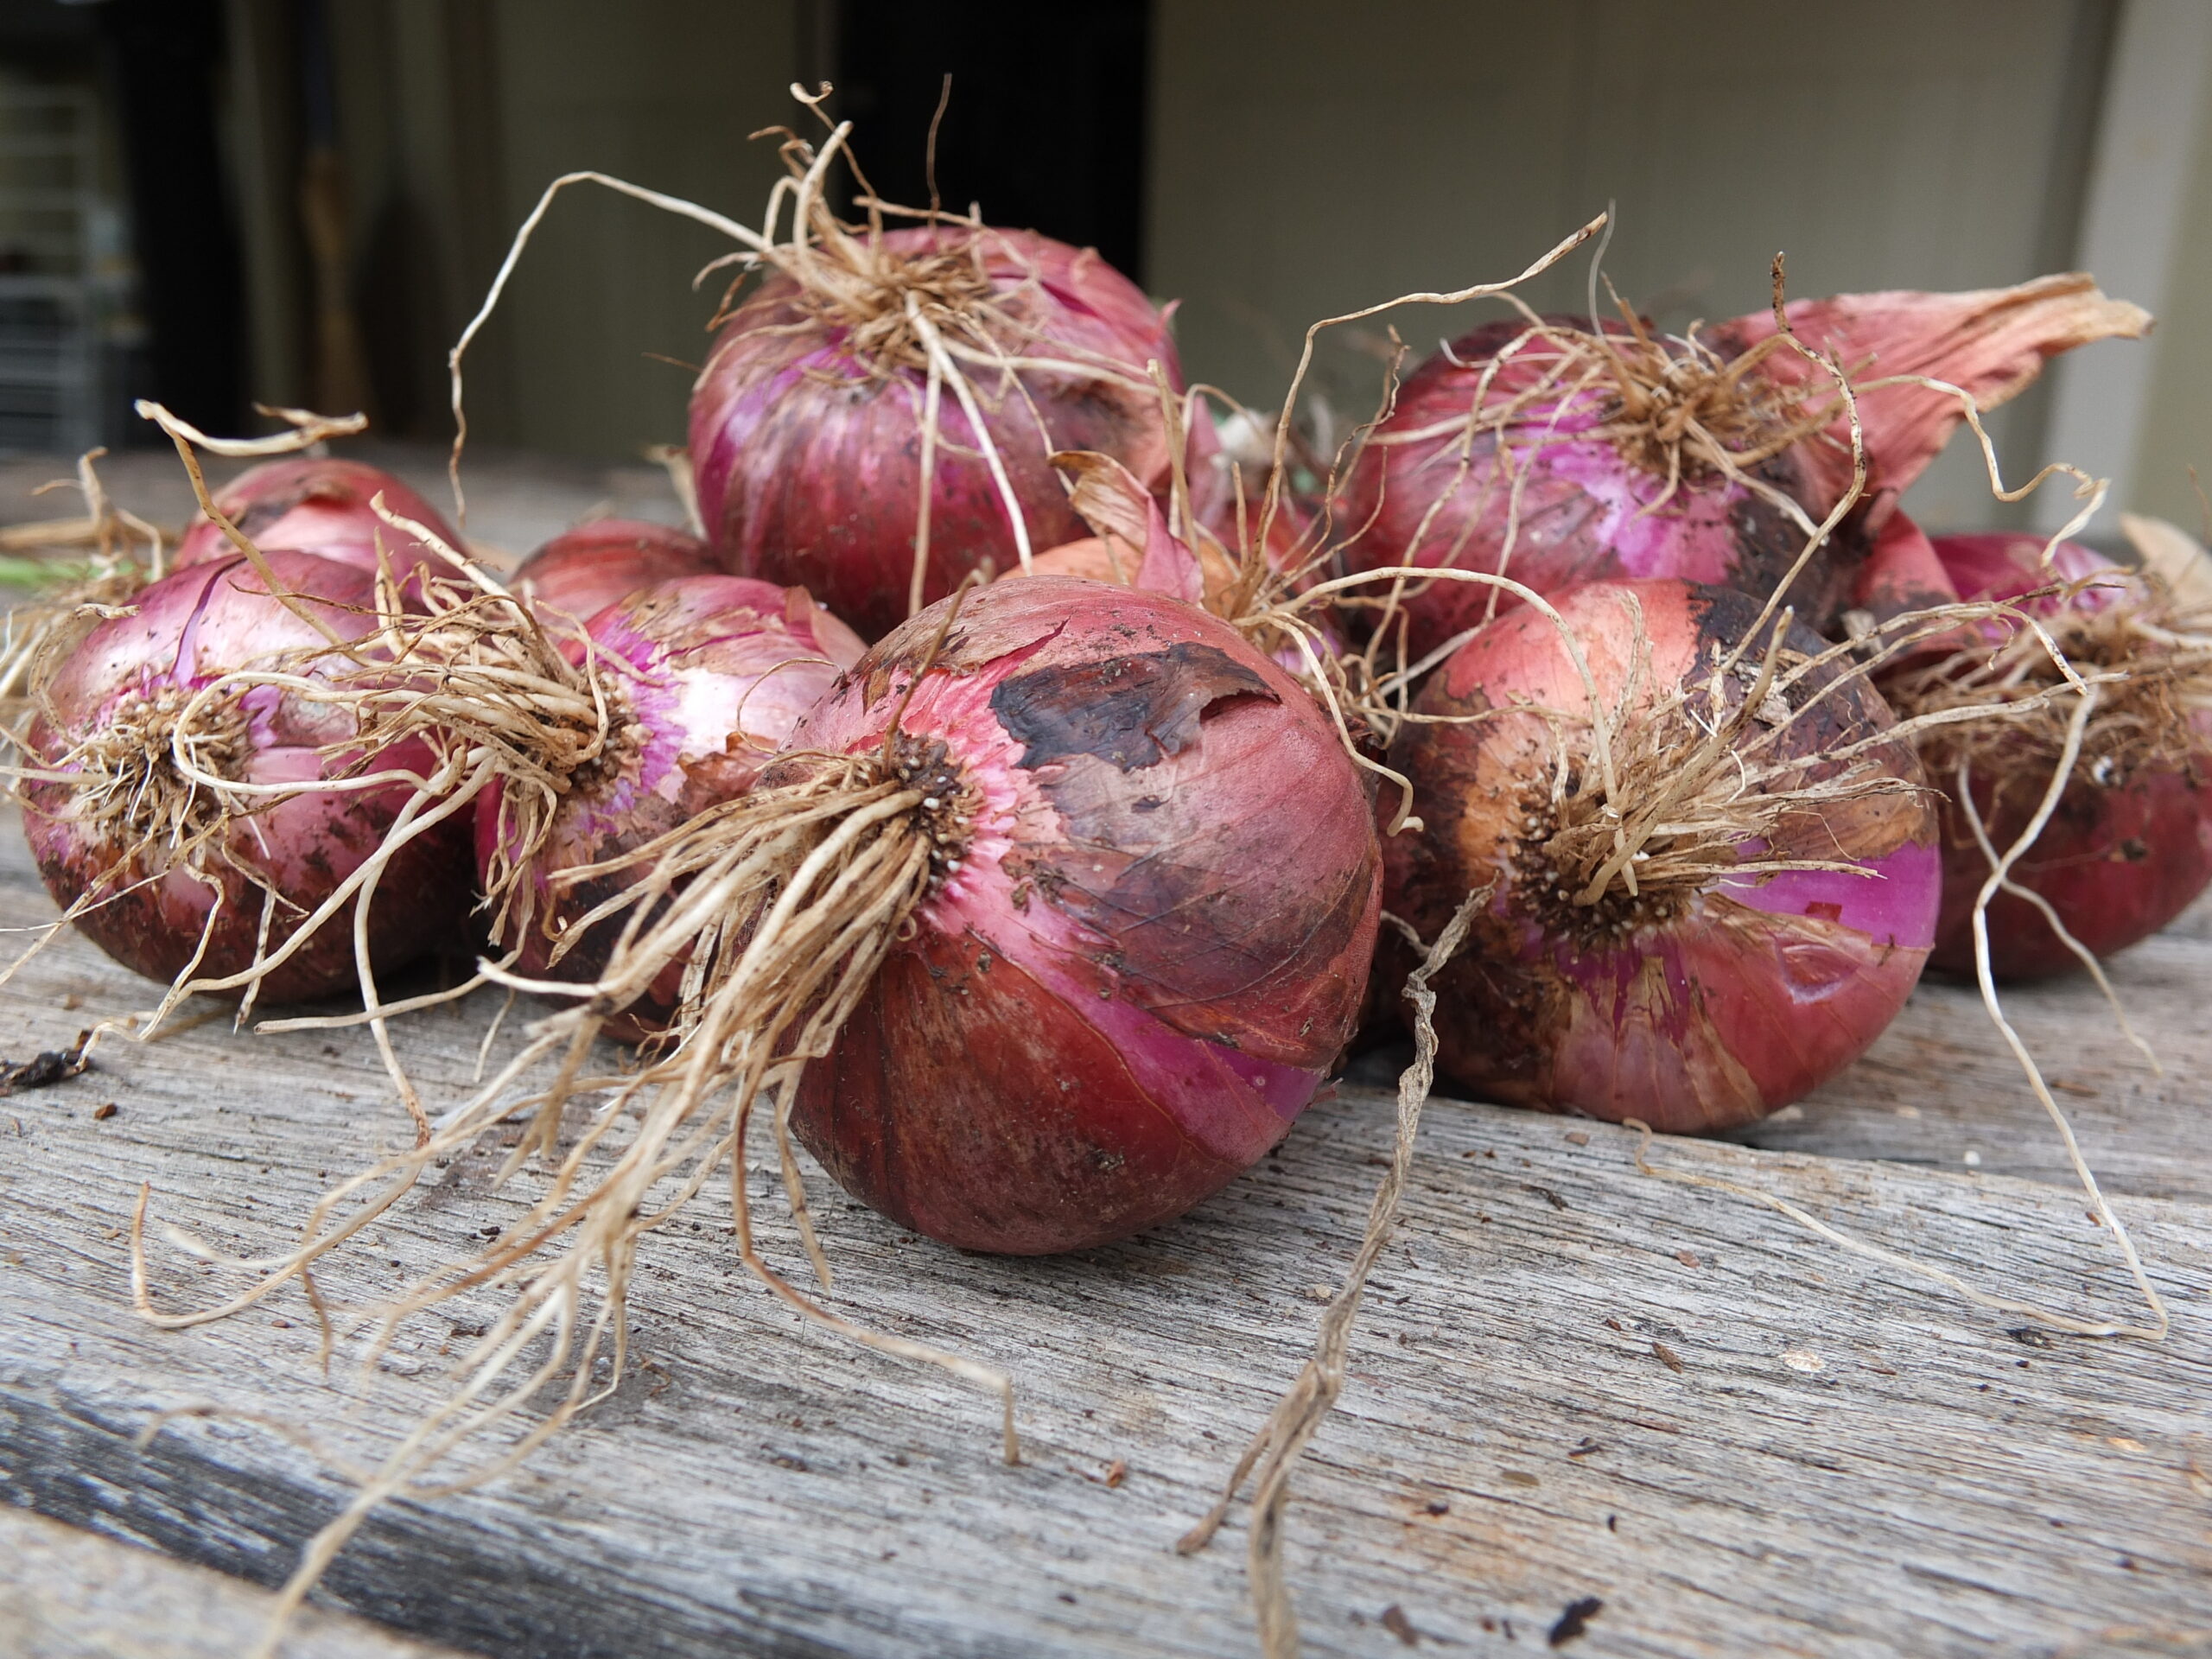 How to harvest and store onions